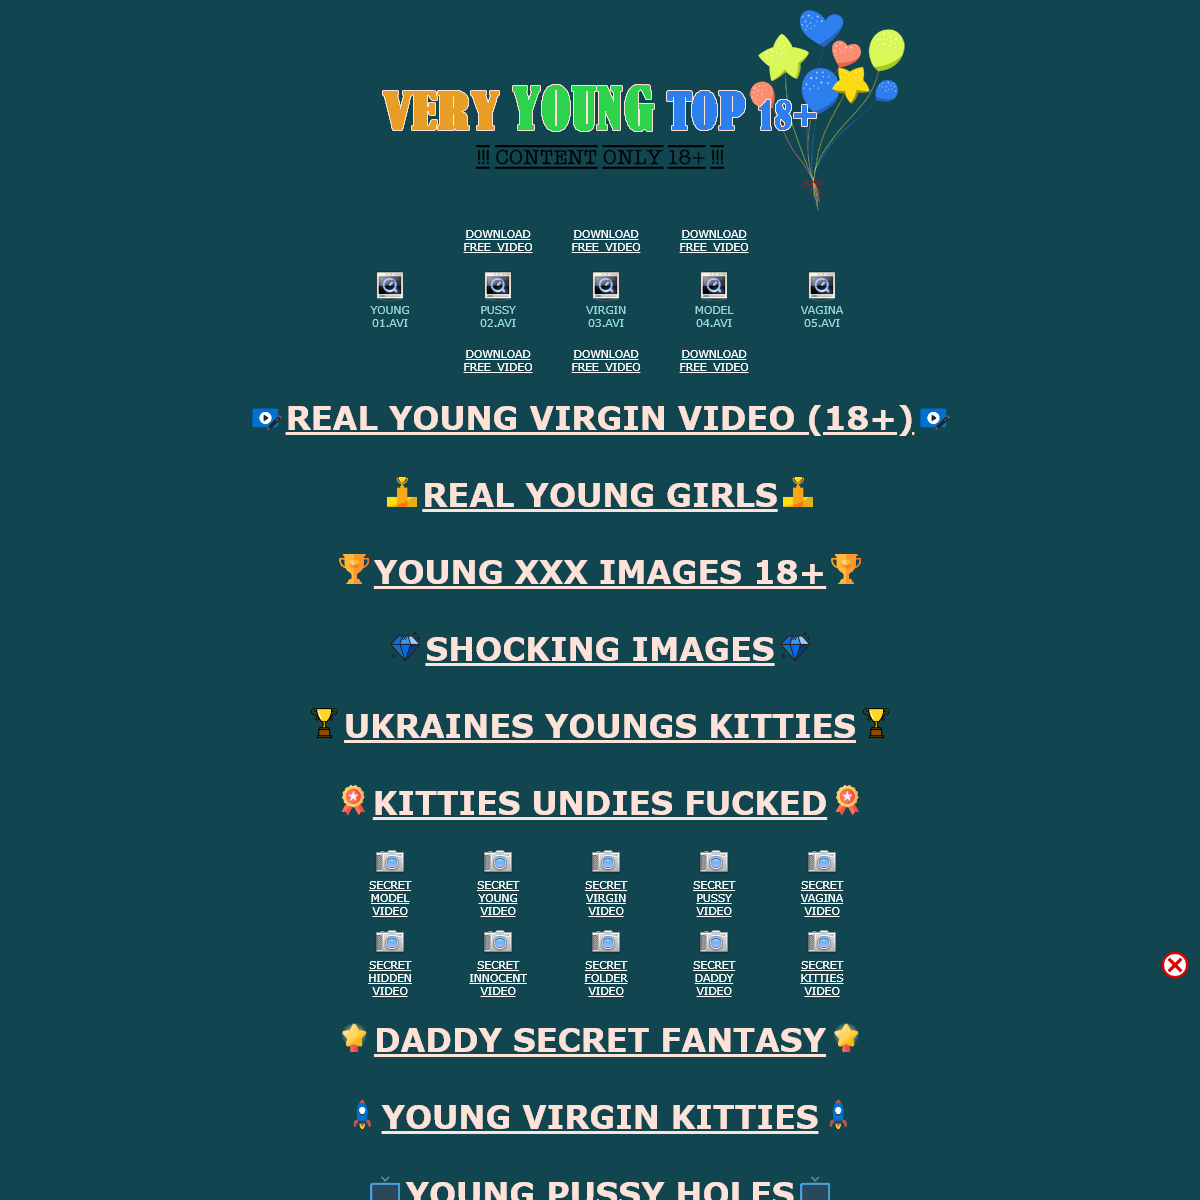 A complete backup of www.youngtop.info